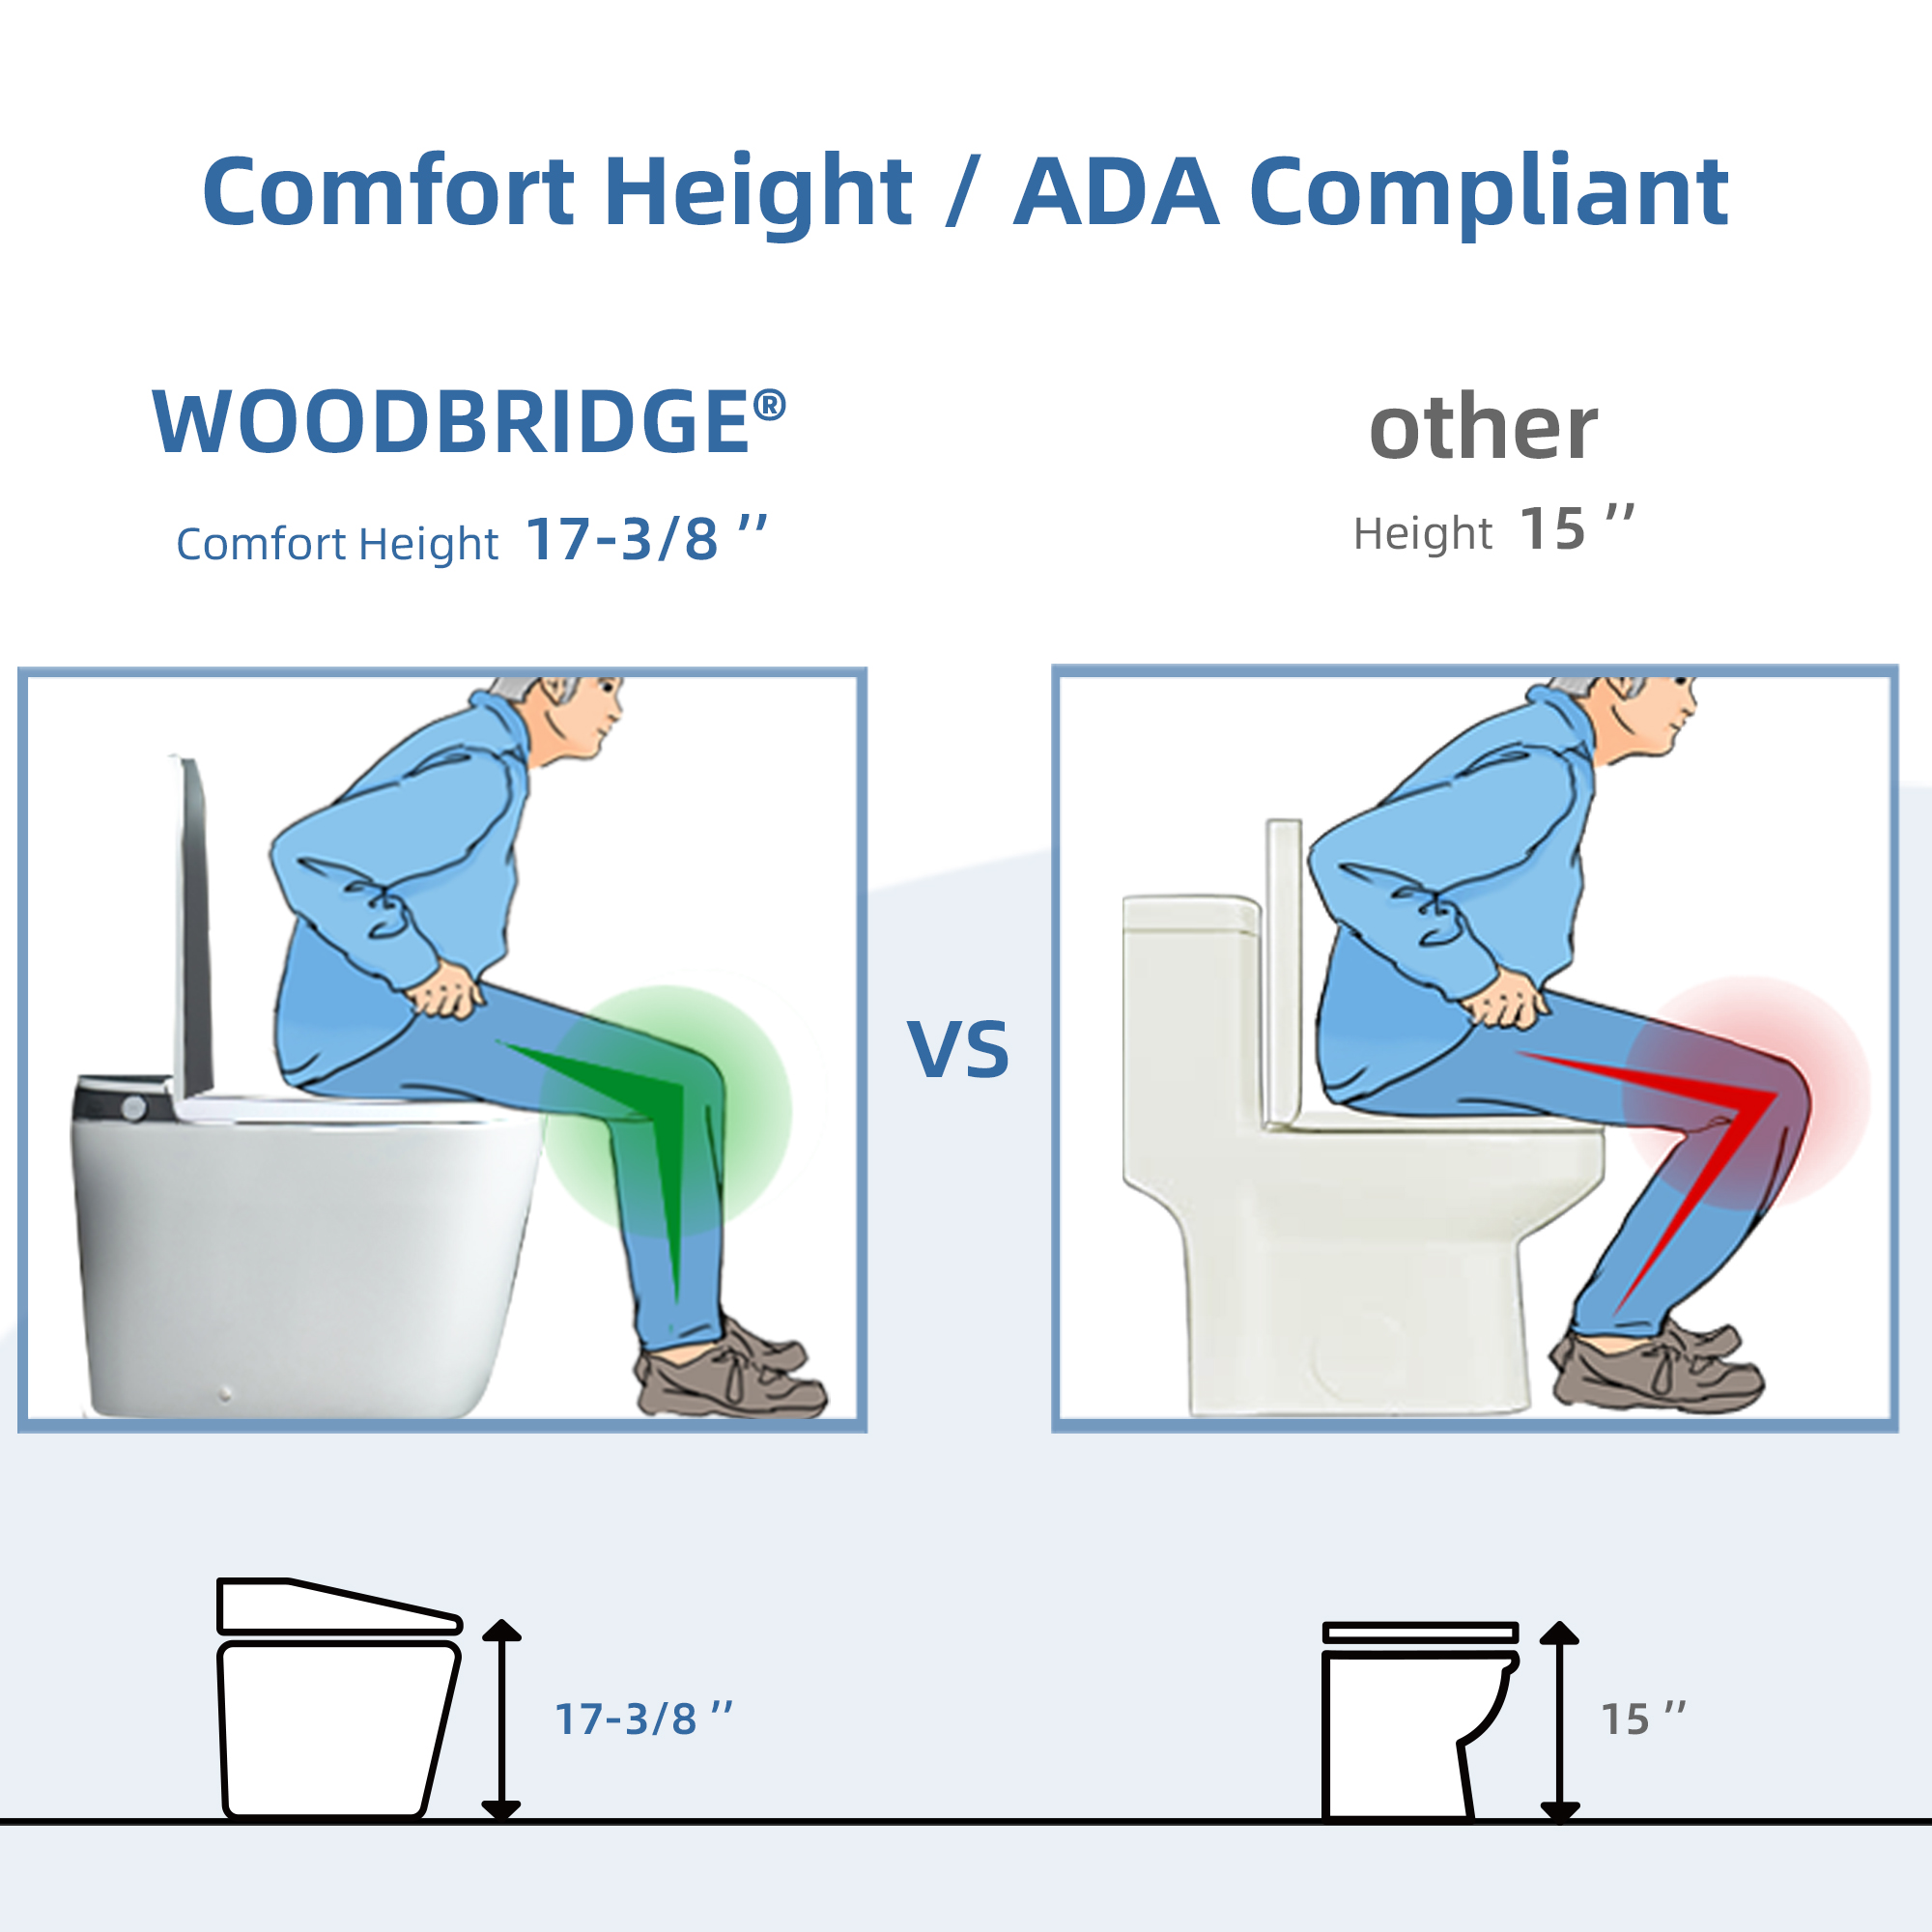  WOODBRIDGE B-0930S 1.6/1.1GPF Dual Flush Auto Open & Close Smart Toilet with Heated Bidet Seat, Intelligent Auto Flush, LED Temperature Display, Remote Control, Chair Height, Foot Sensor Flush and Build-In Booster Pump and Cleaning Foam Dispenser_12613